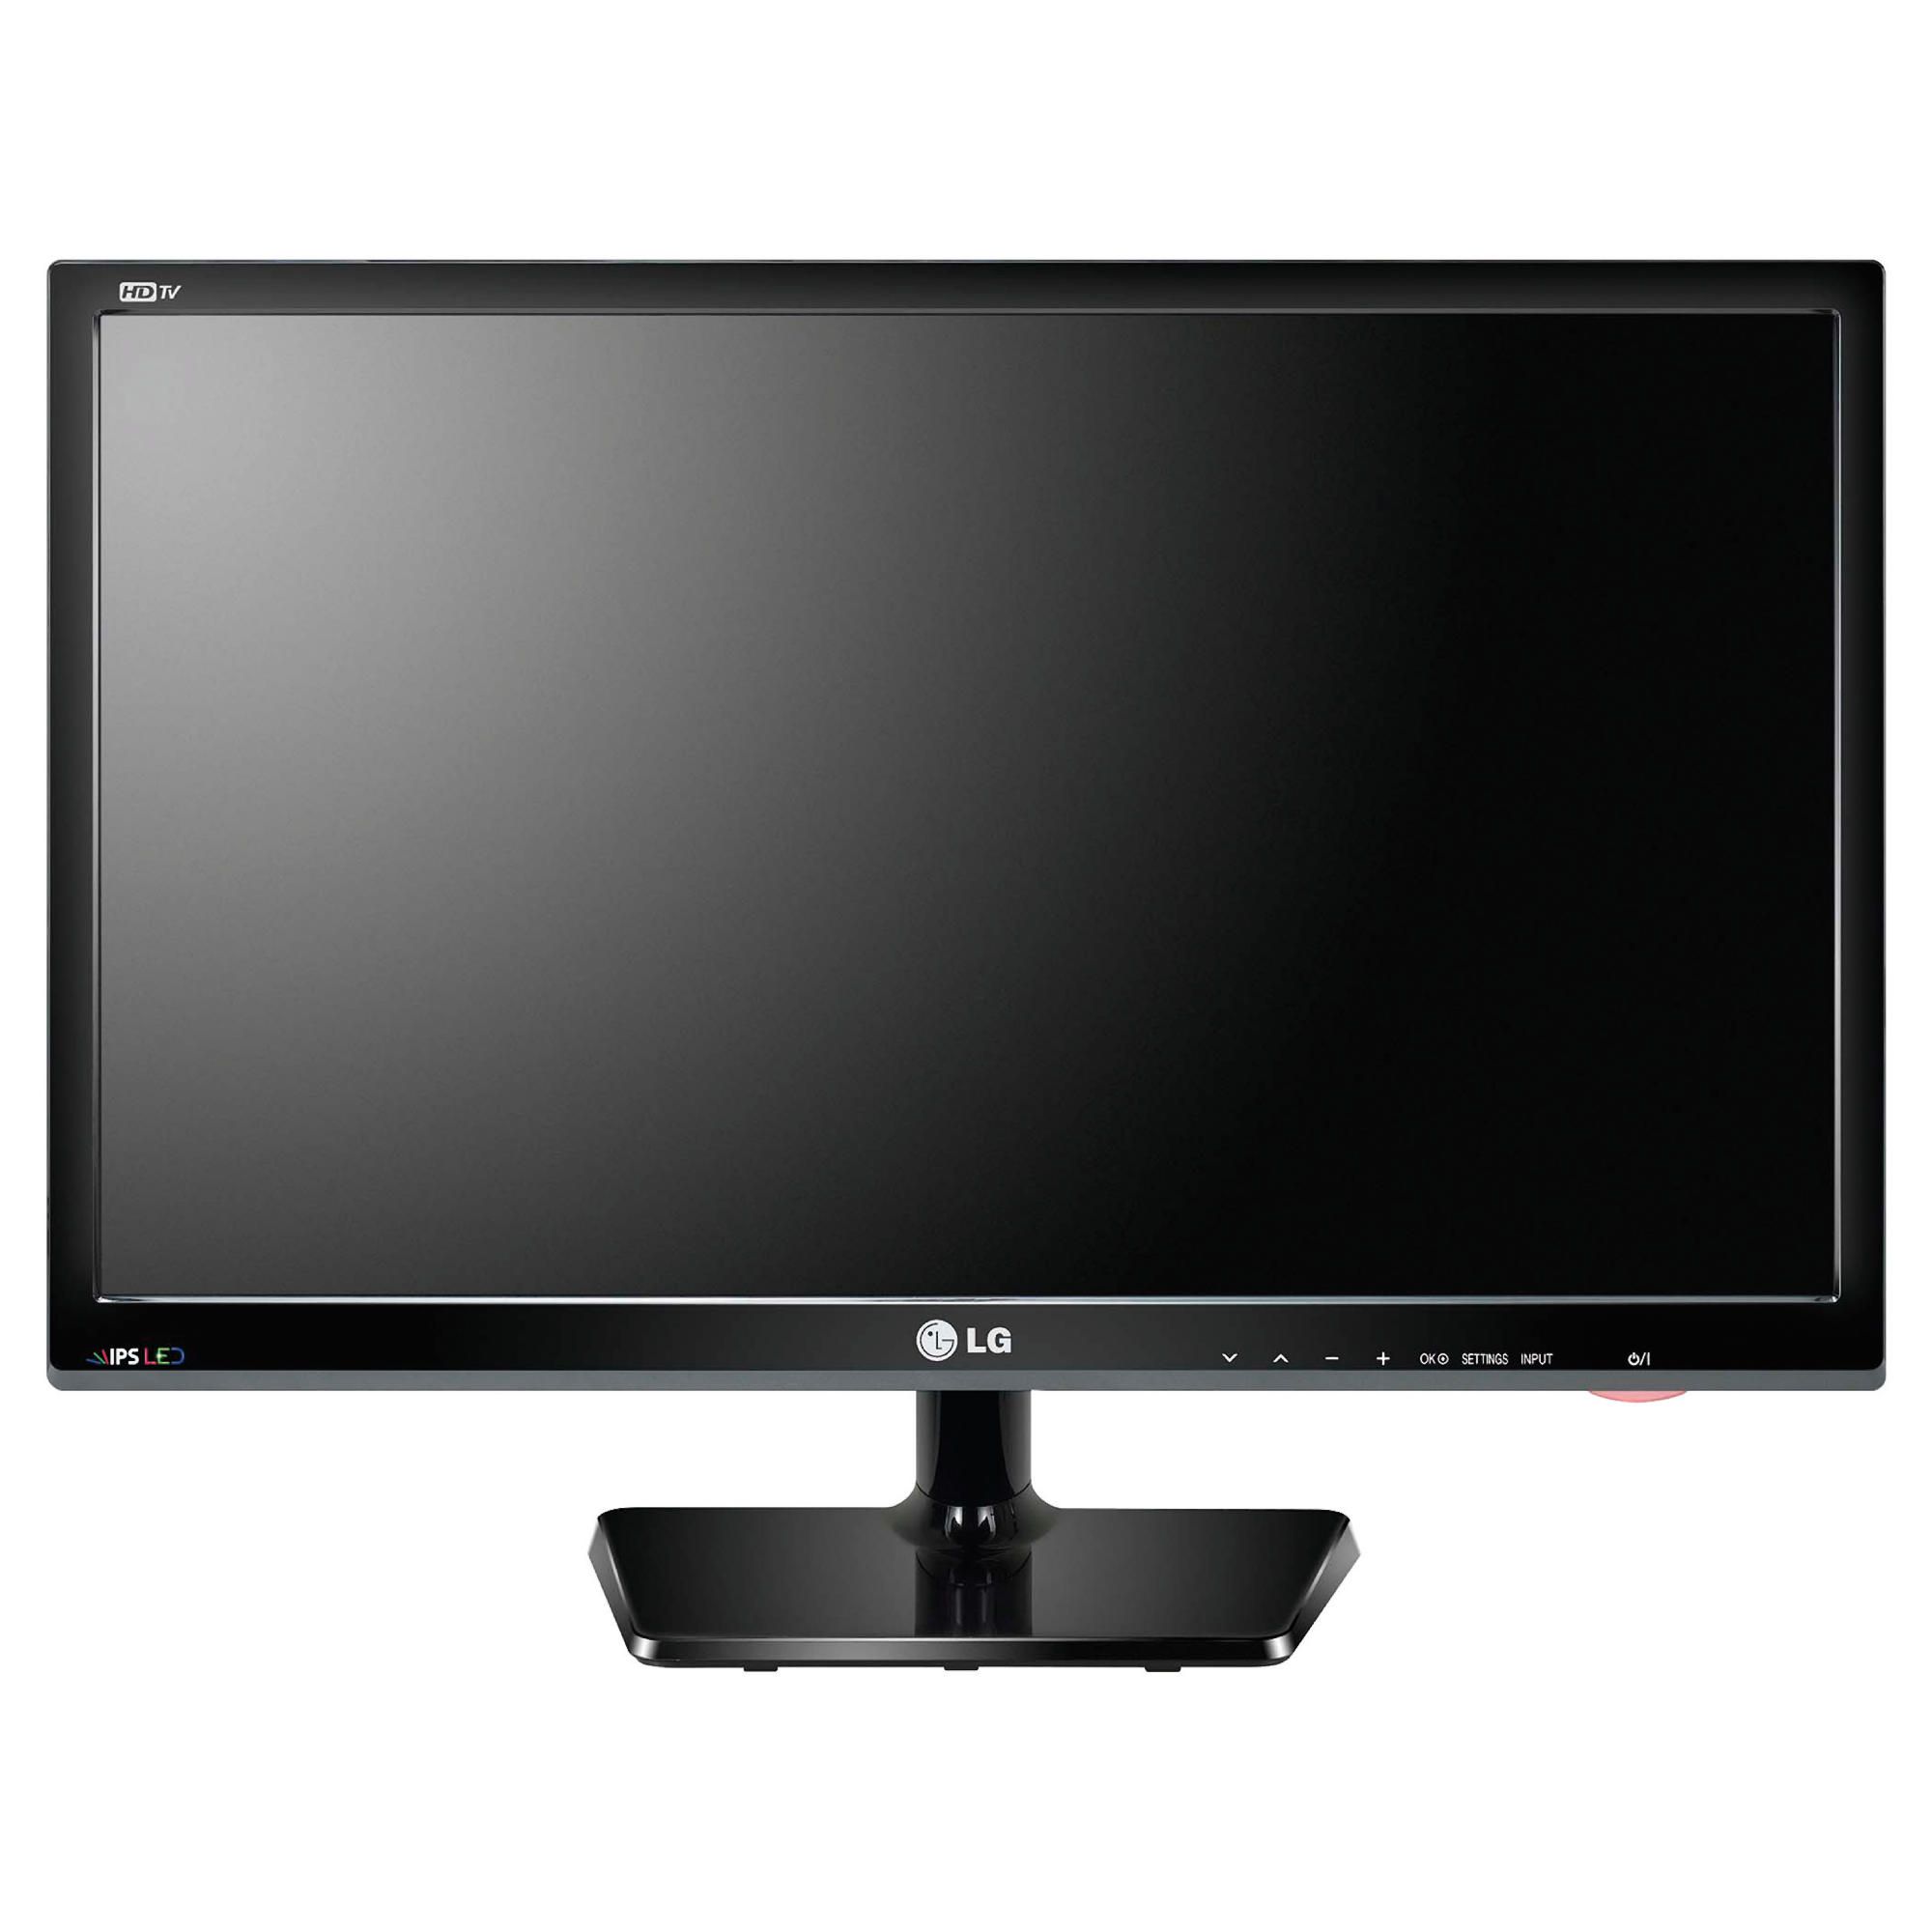 LG 22MA33D 22 inch HD Ready 720p LED TV with Freeview